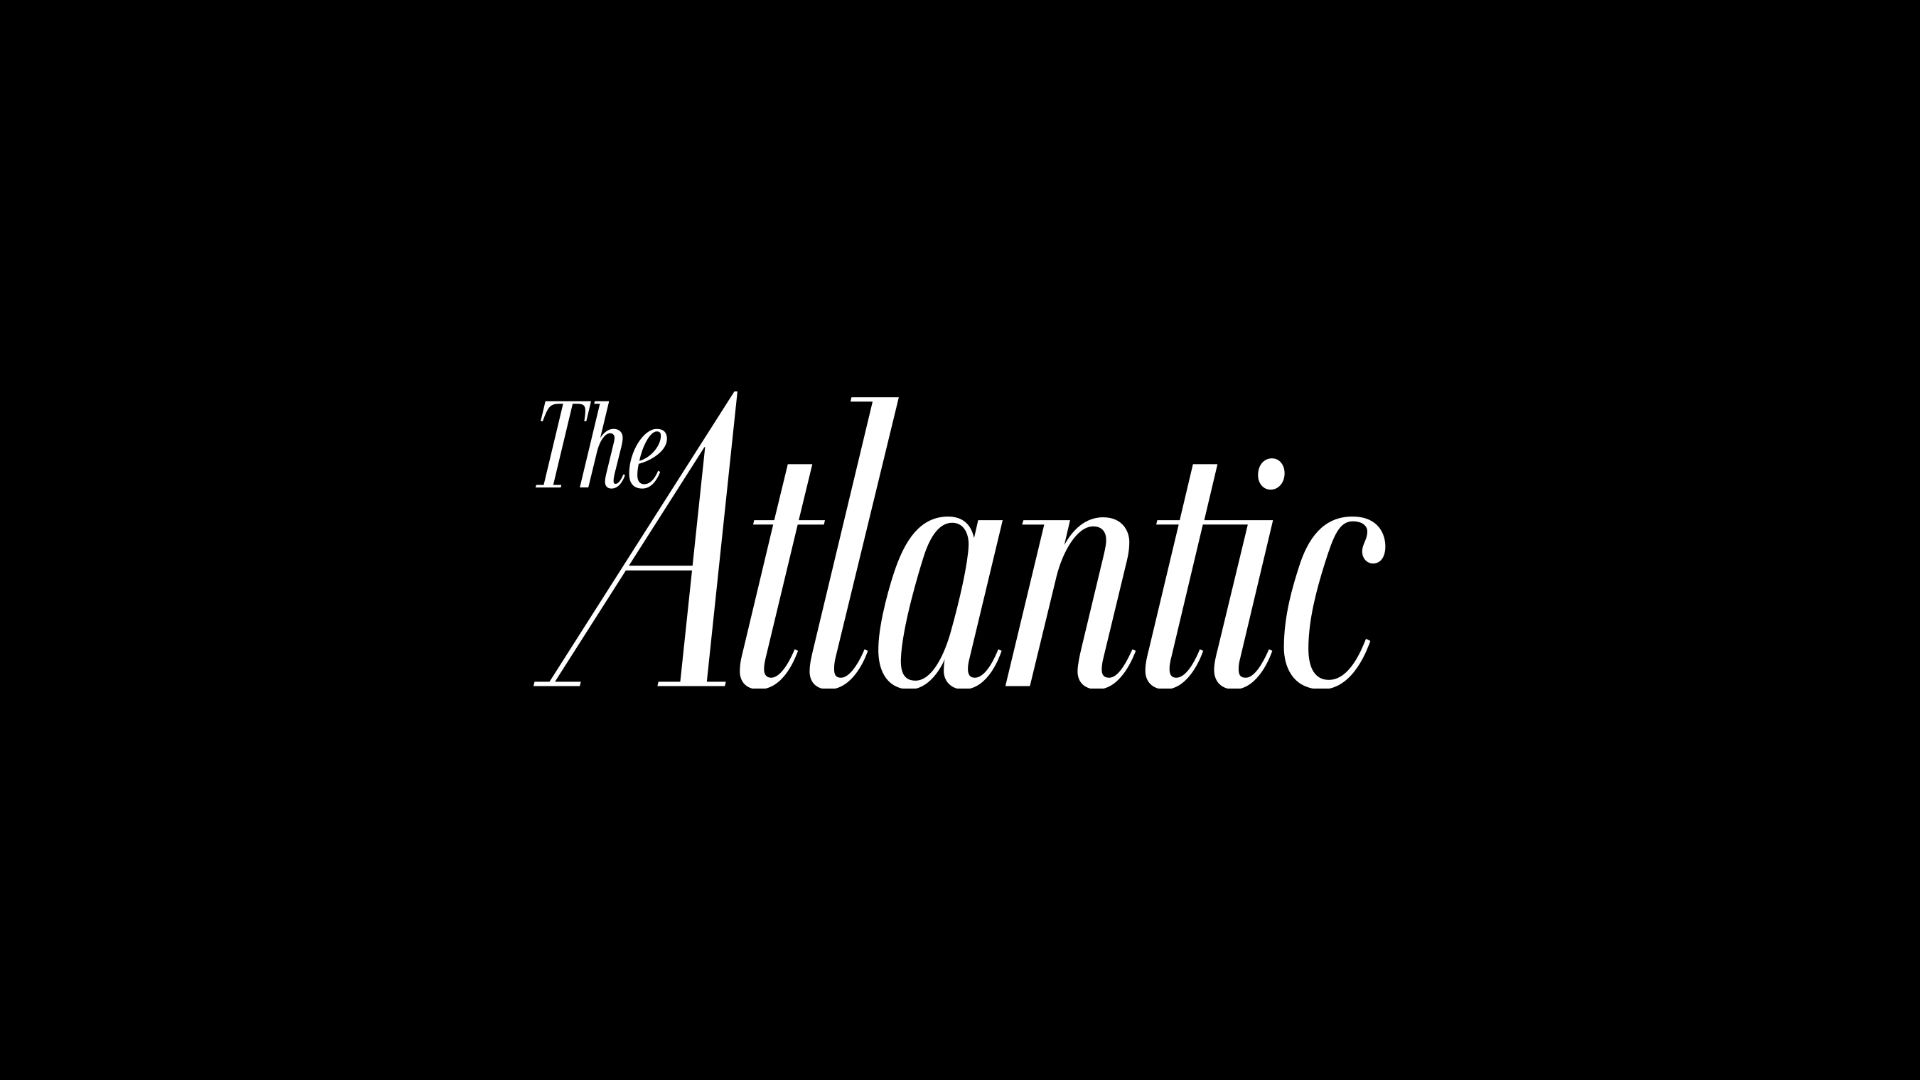 The Atlantic Cover Photo in Color